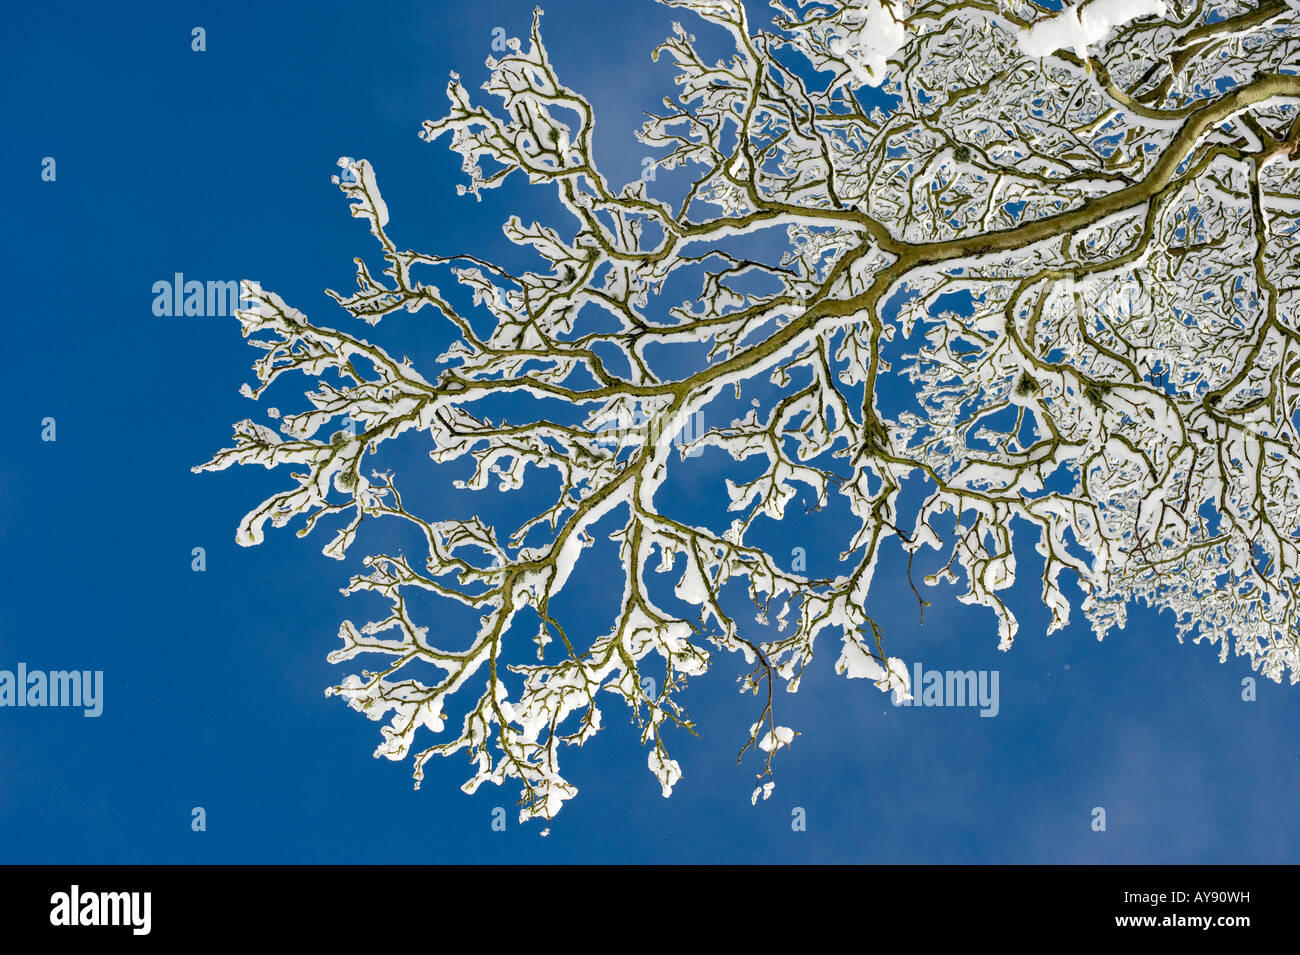 Acer pseudoplatanus. Sycamore tree branches and buds covered in snow against a blue sky. UK Stock Photo